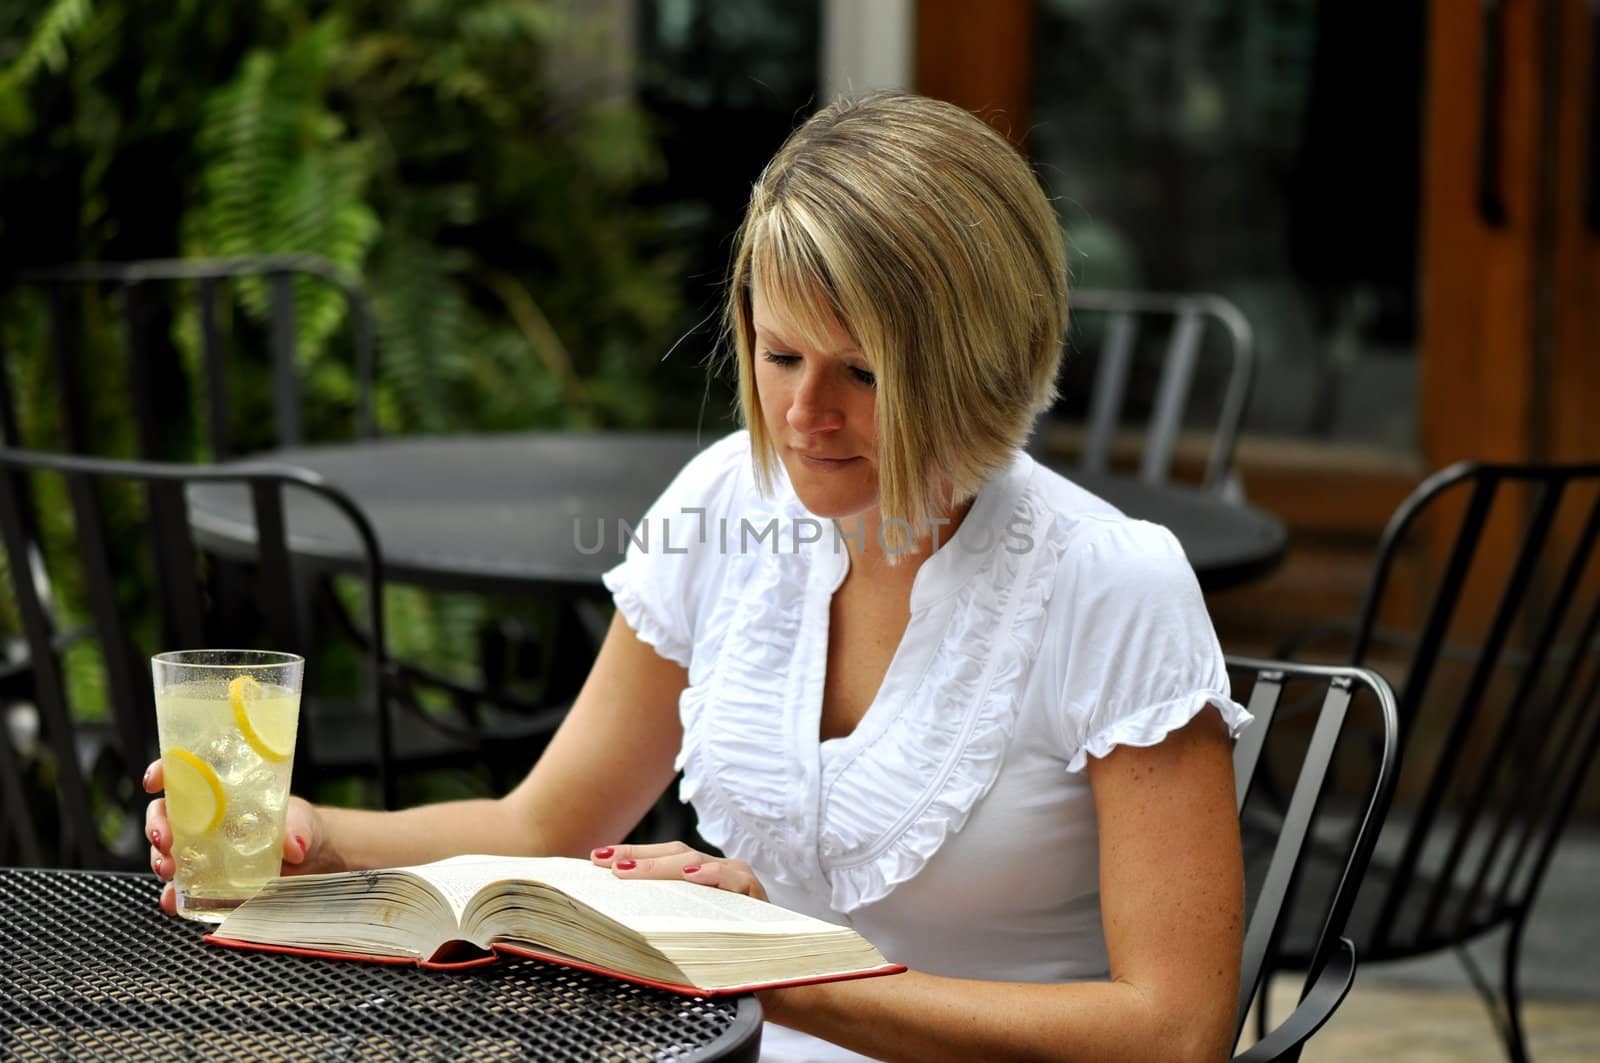 Female blond student reading textbook with glass of lemonade.  